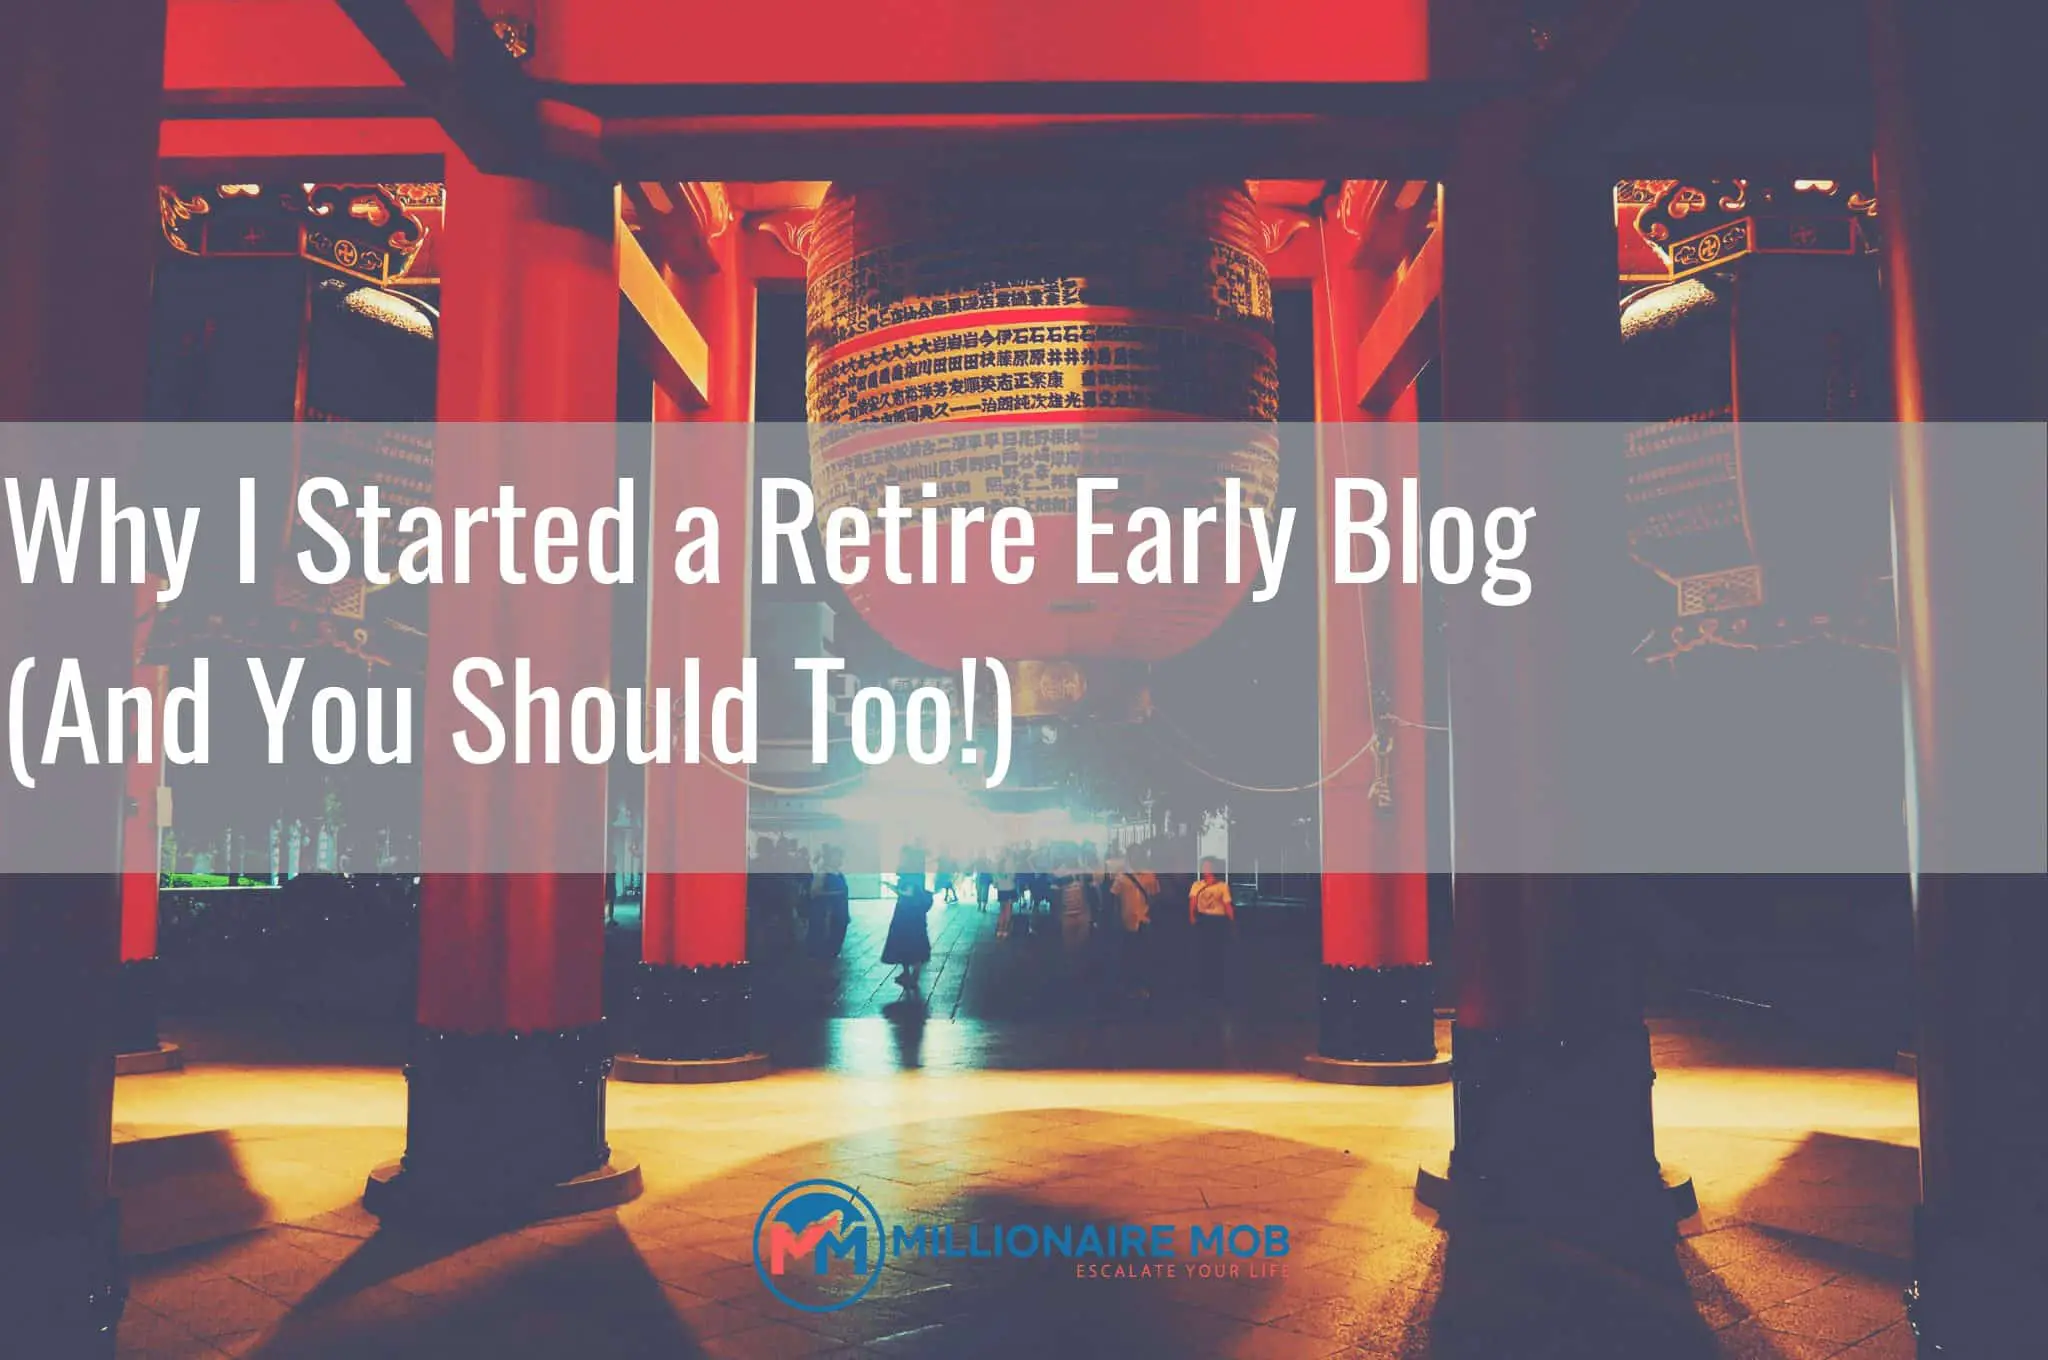 Why I Started a Retire Early Blog